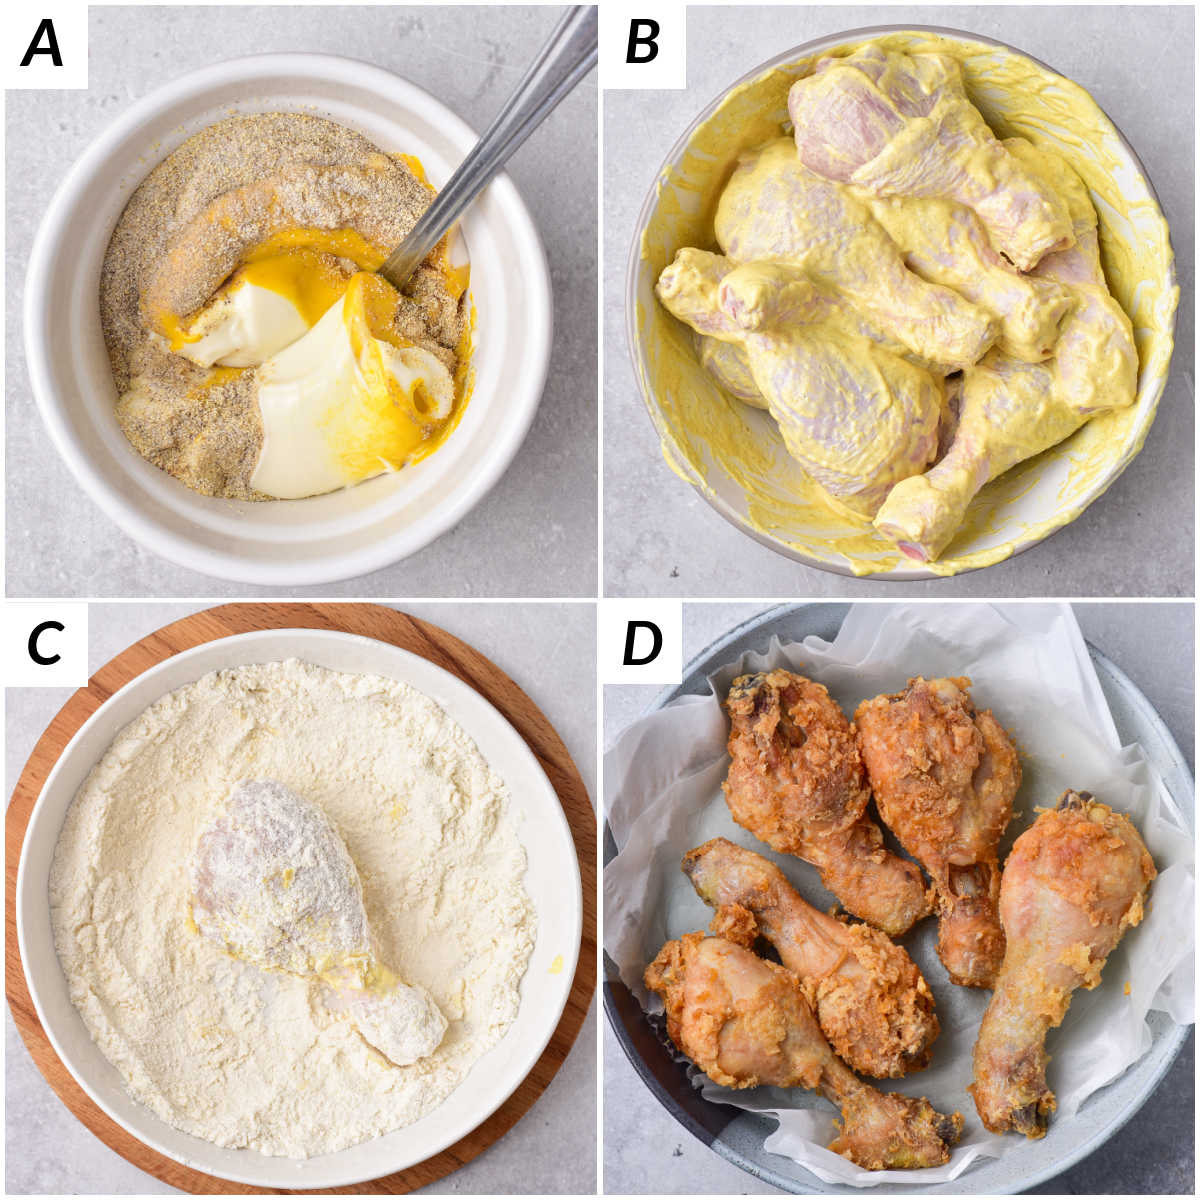 image collage showing the steps for making deep fried chicken legs